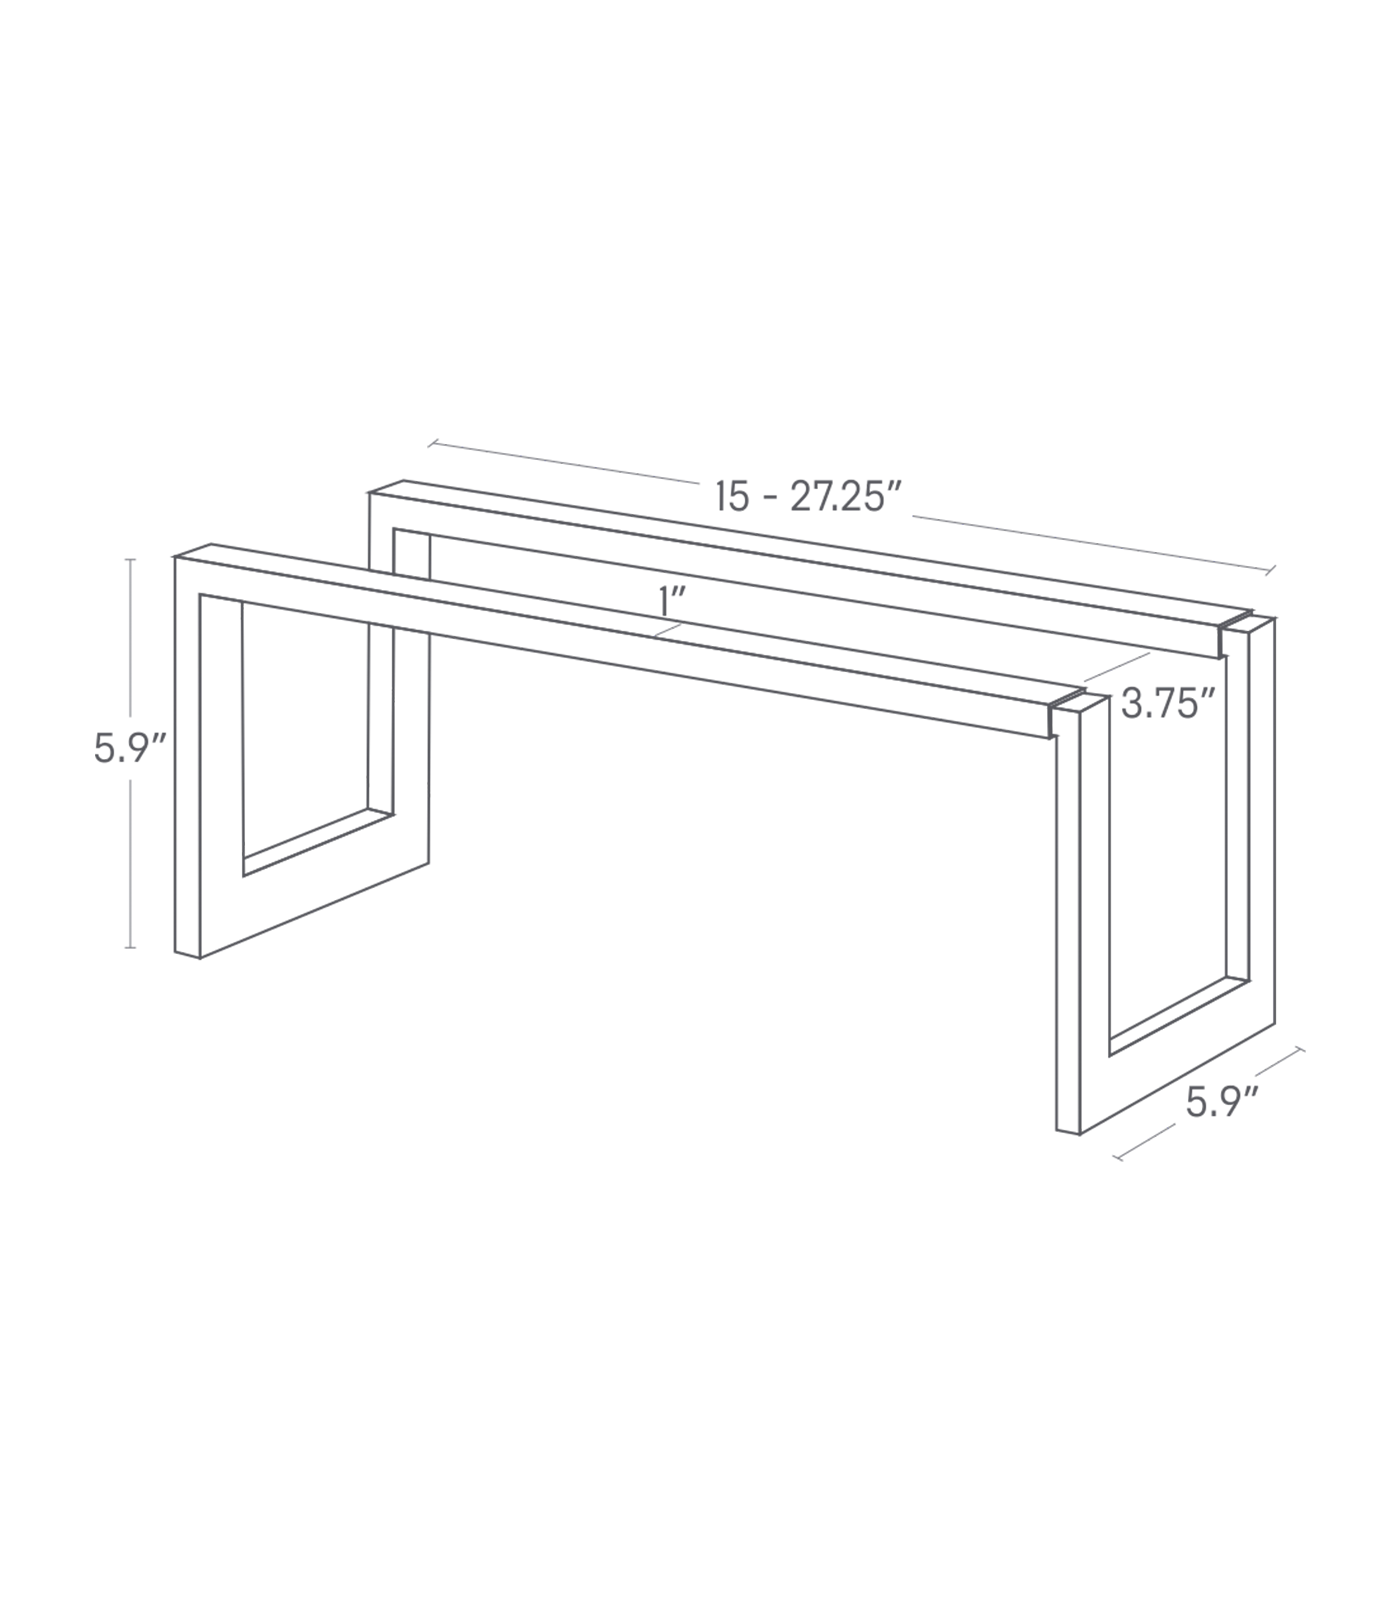 Dimension image for Expandable Shoe Rack showing height of 5.9